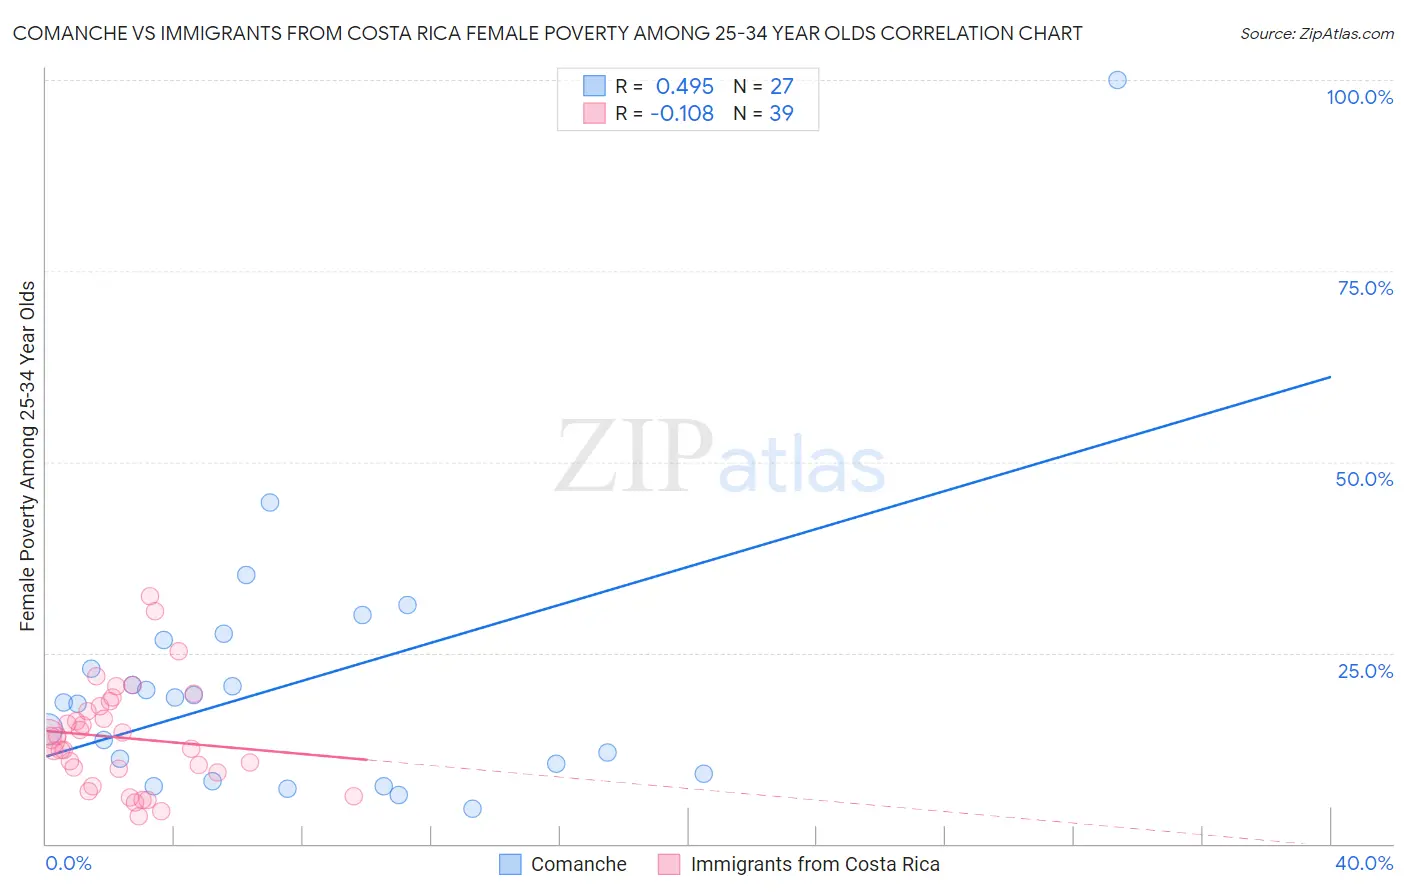 Comanche vs Immigrants from Costa Rica Female Poverty Among 25-34 Year Olds